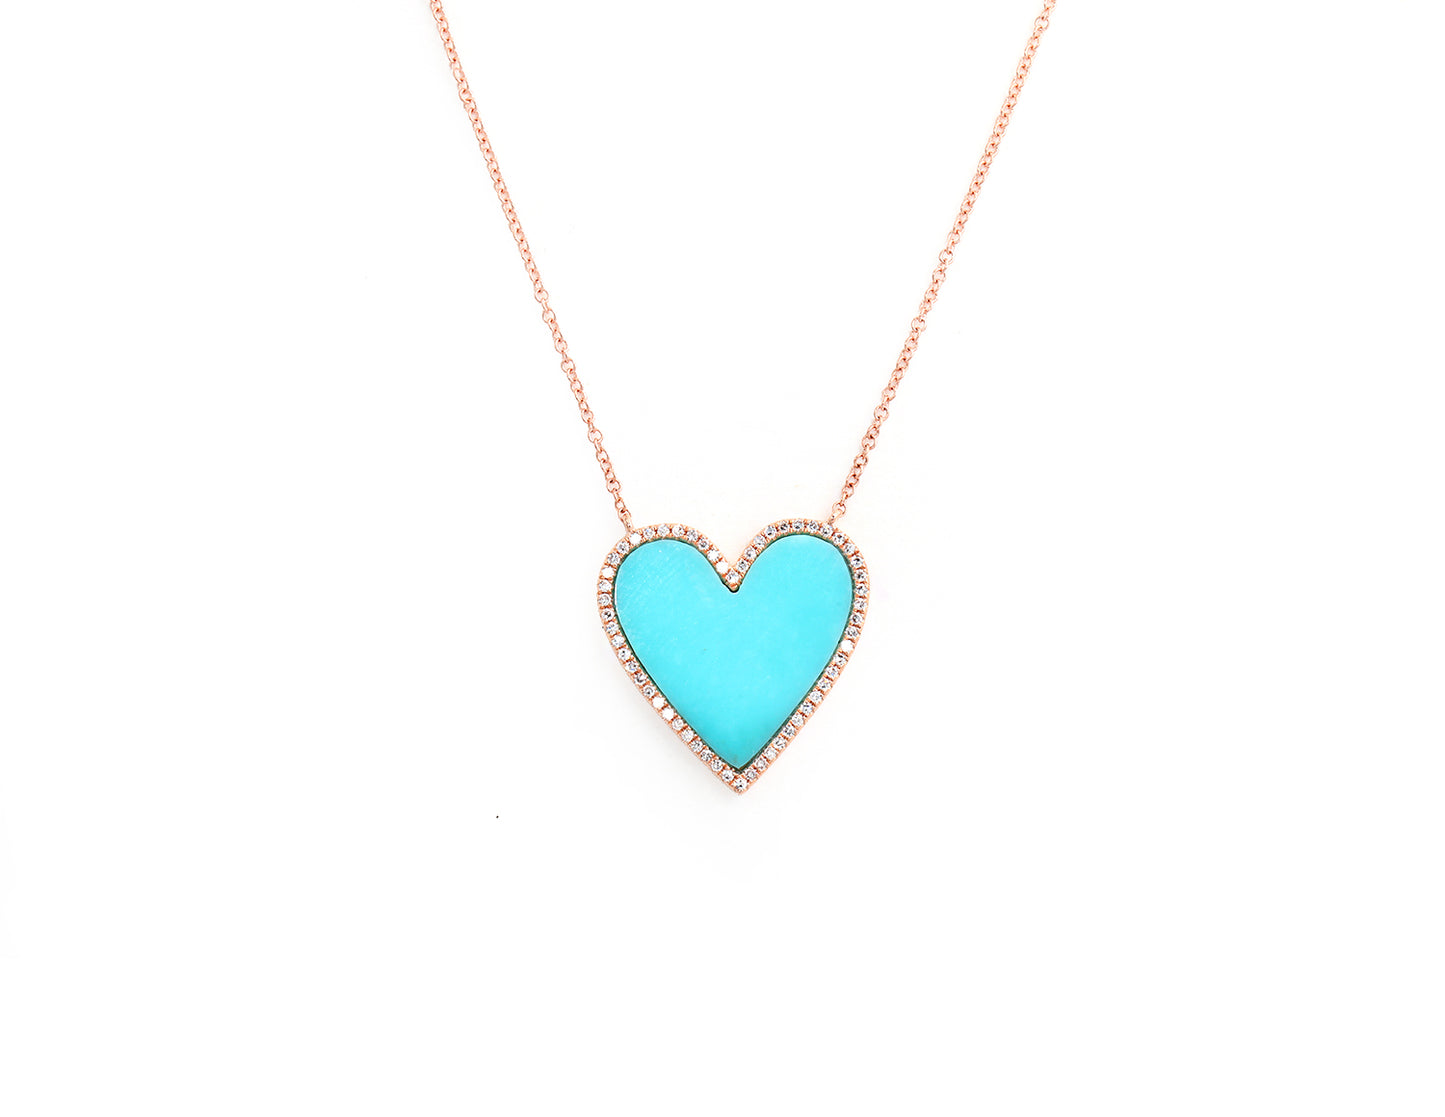 14k rose gold diamond pave and turquoise heart necklace